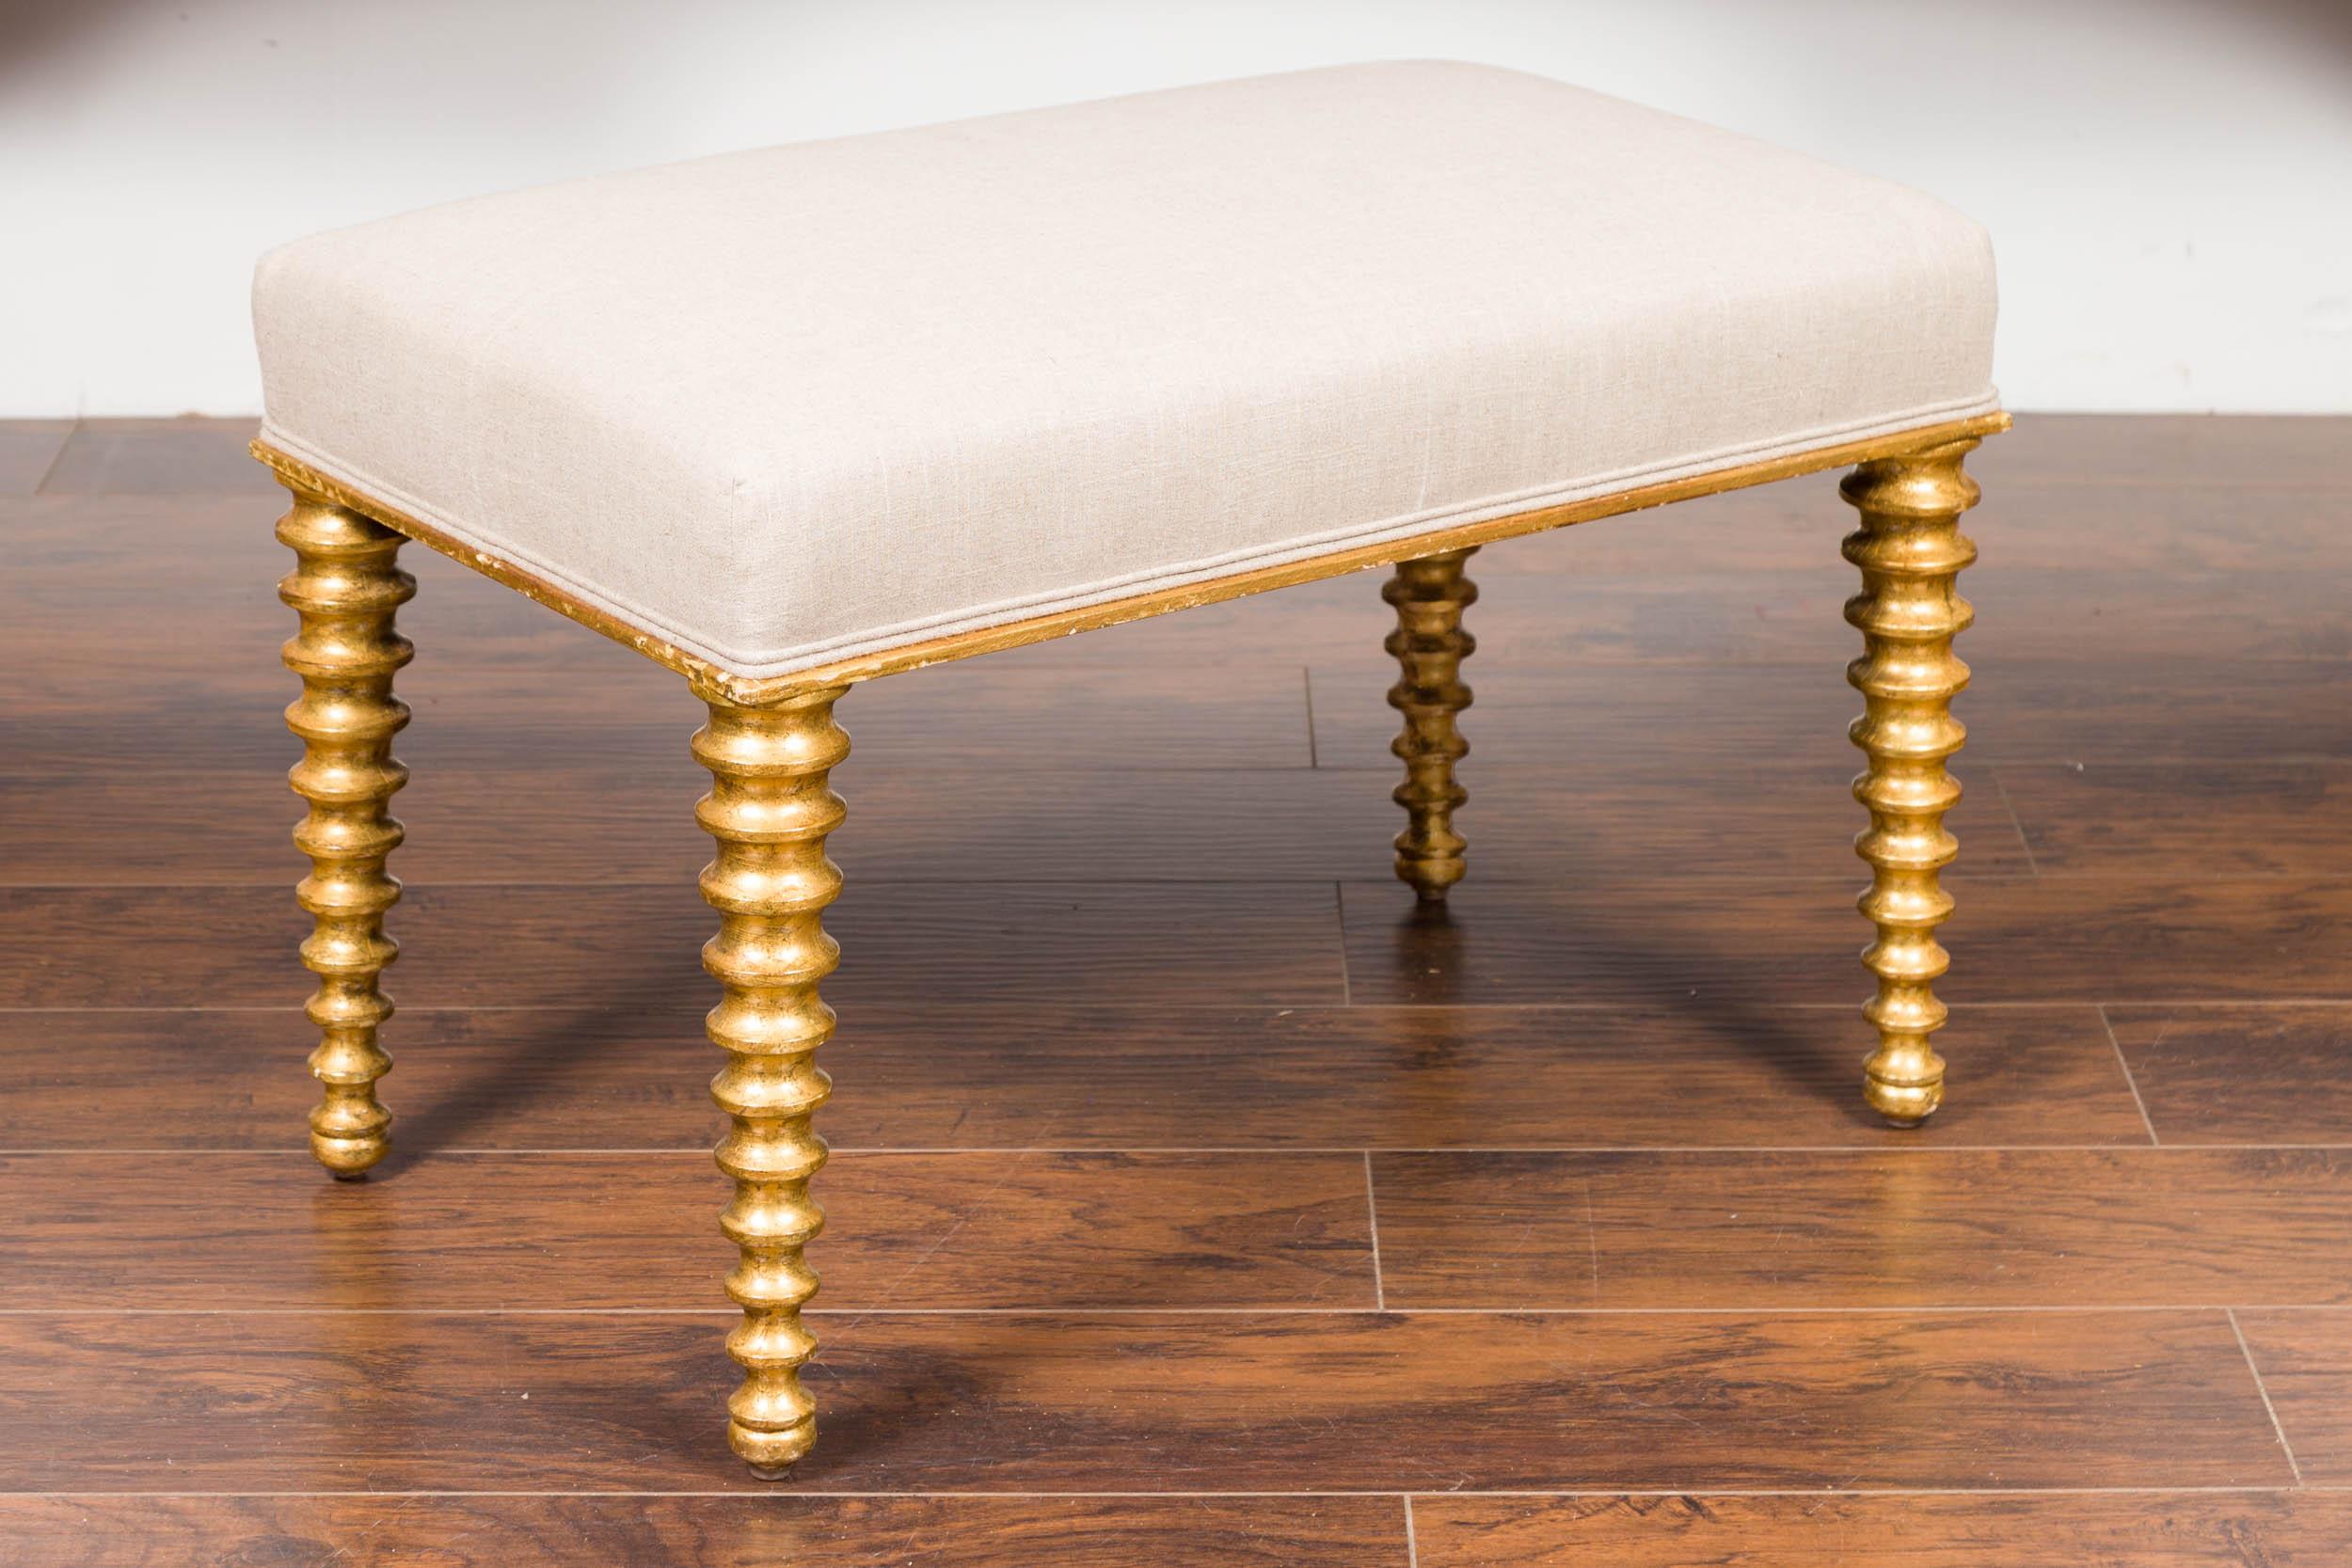 A French giltwood stool from the mid-20th century, with spool legs and linen upholstery. Born in France during the midcentury period, this gilded stool features a rectangular seat that has been reupholstered with a new linen double welt fabric. The